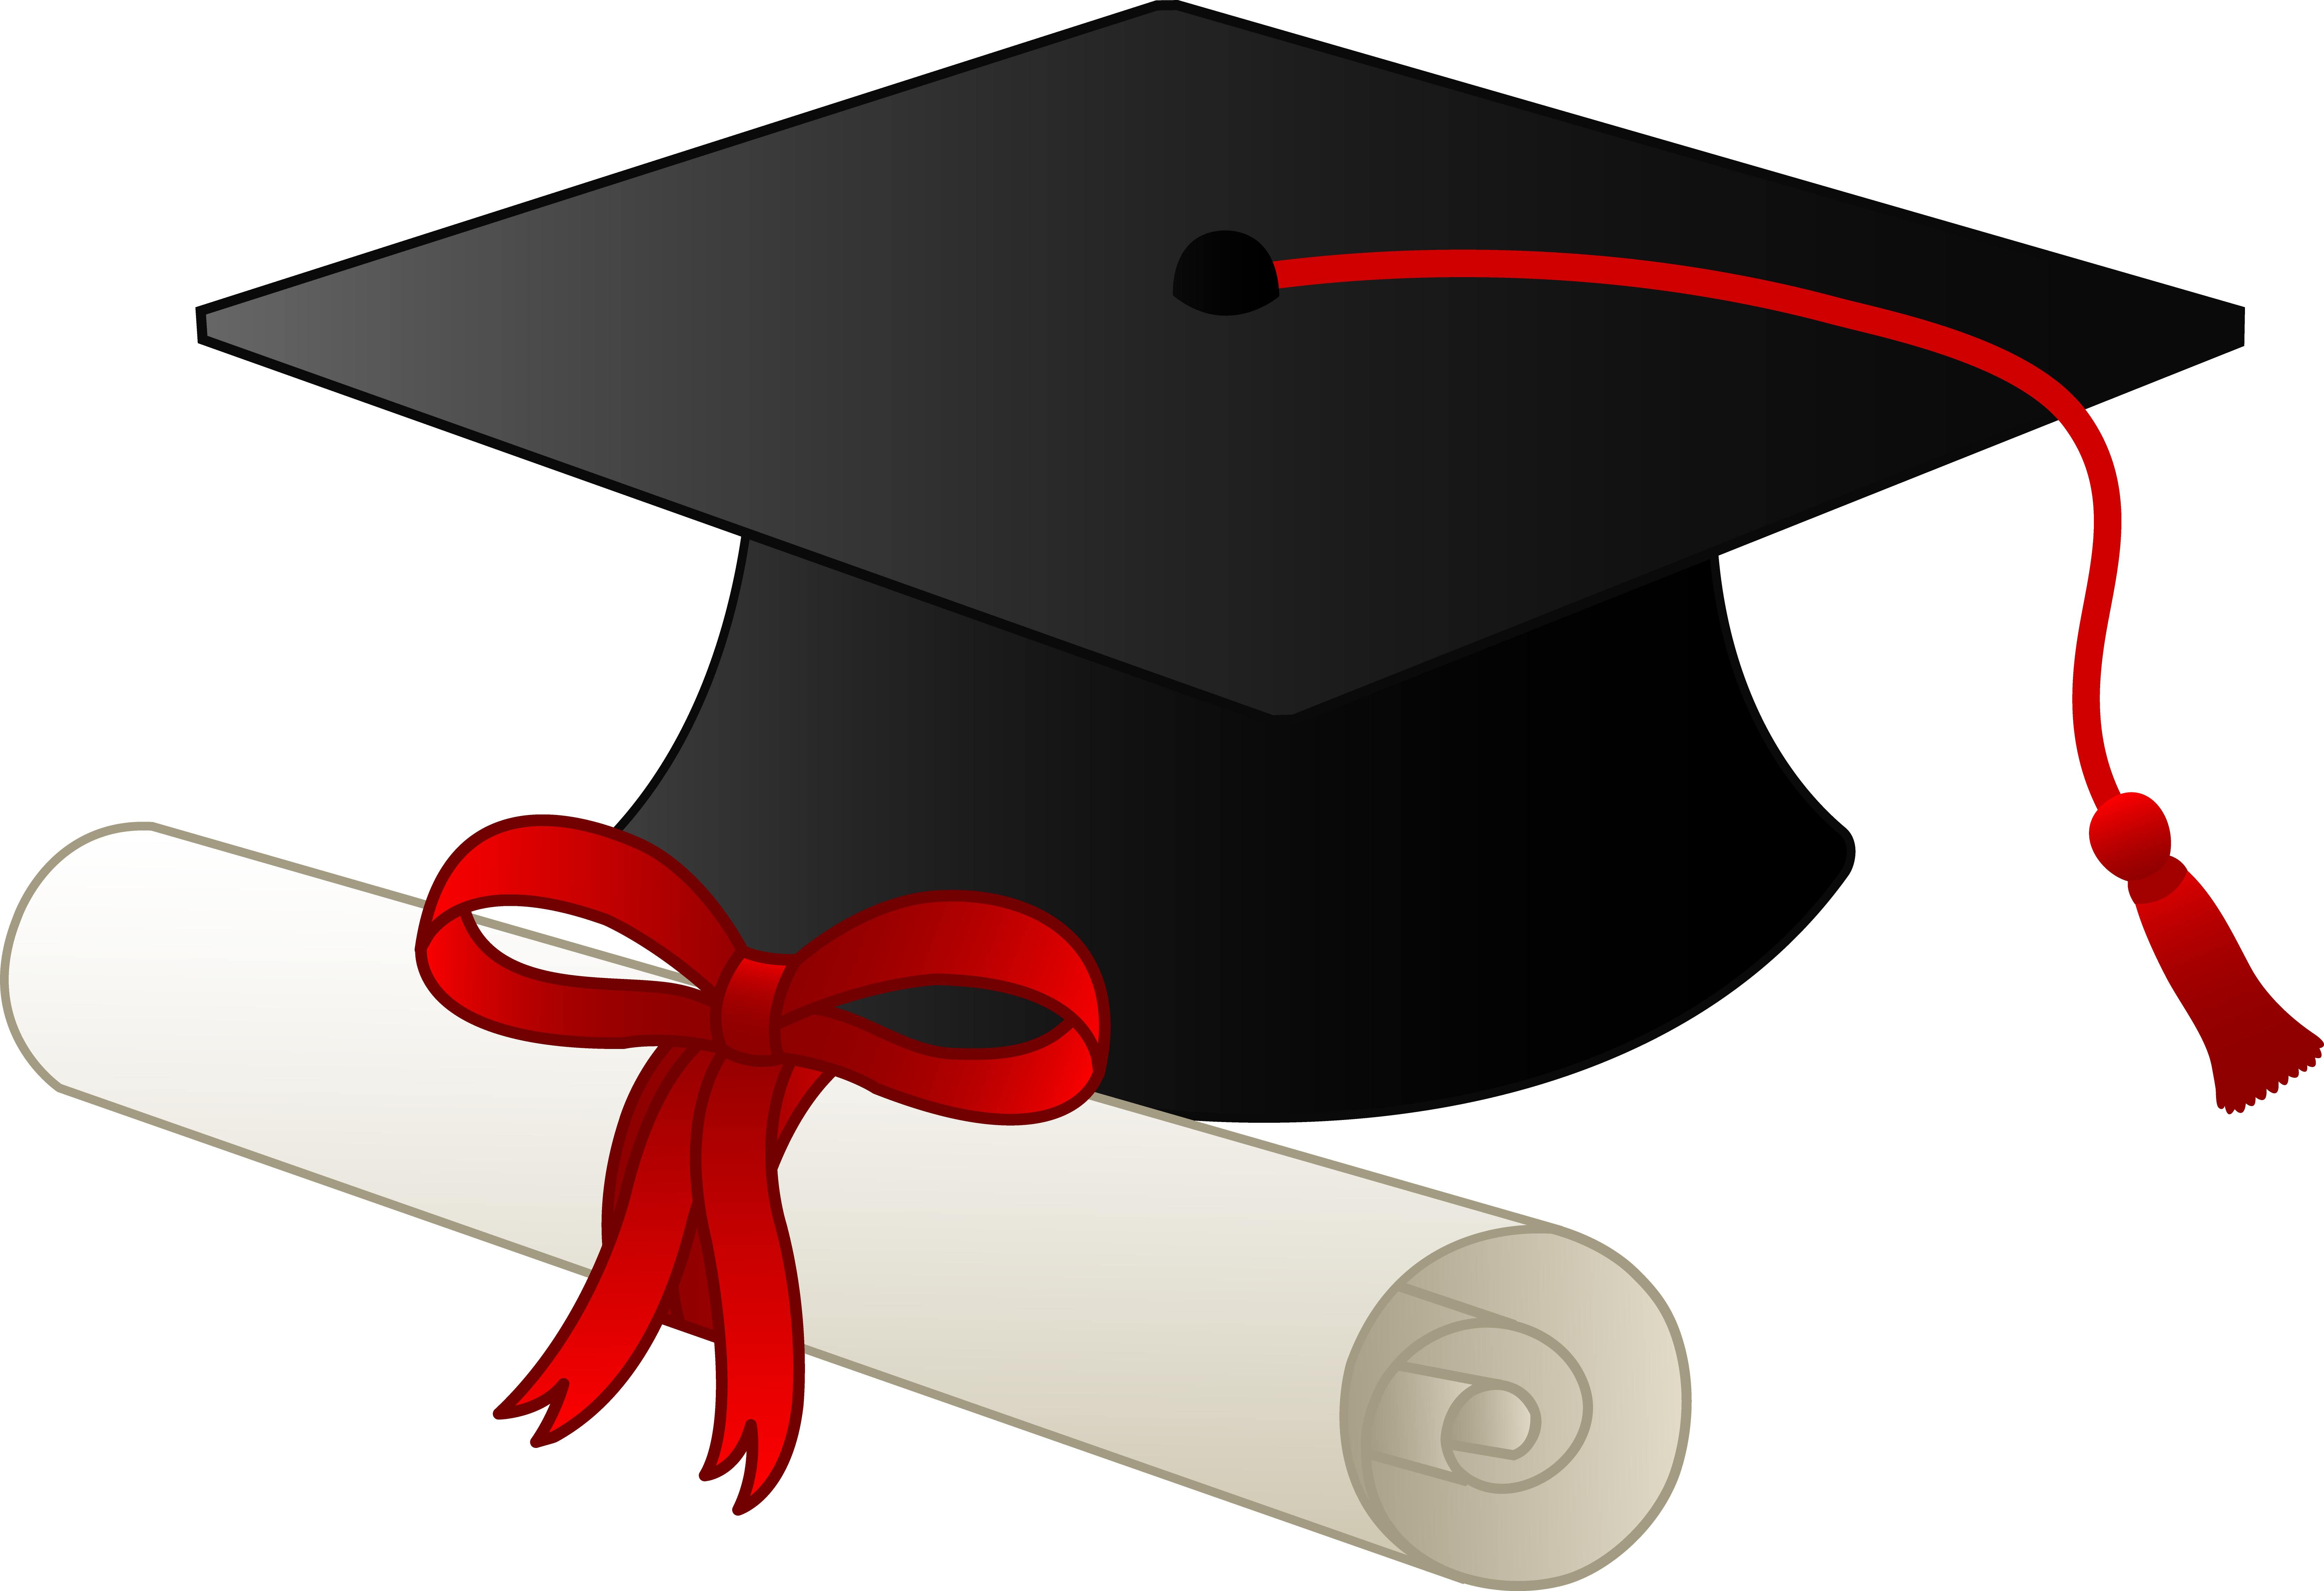 Free clipart for graduation